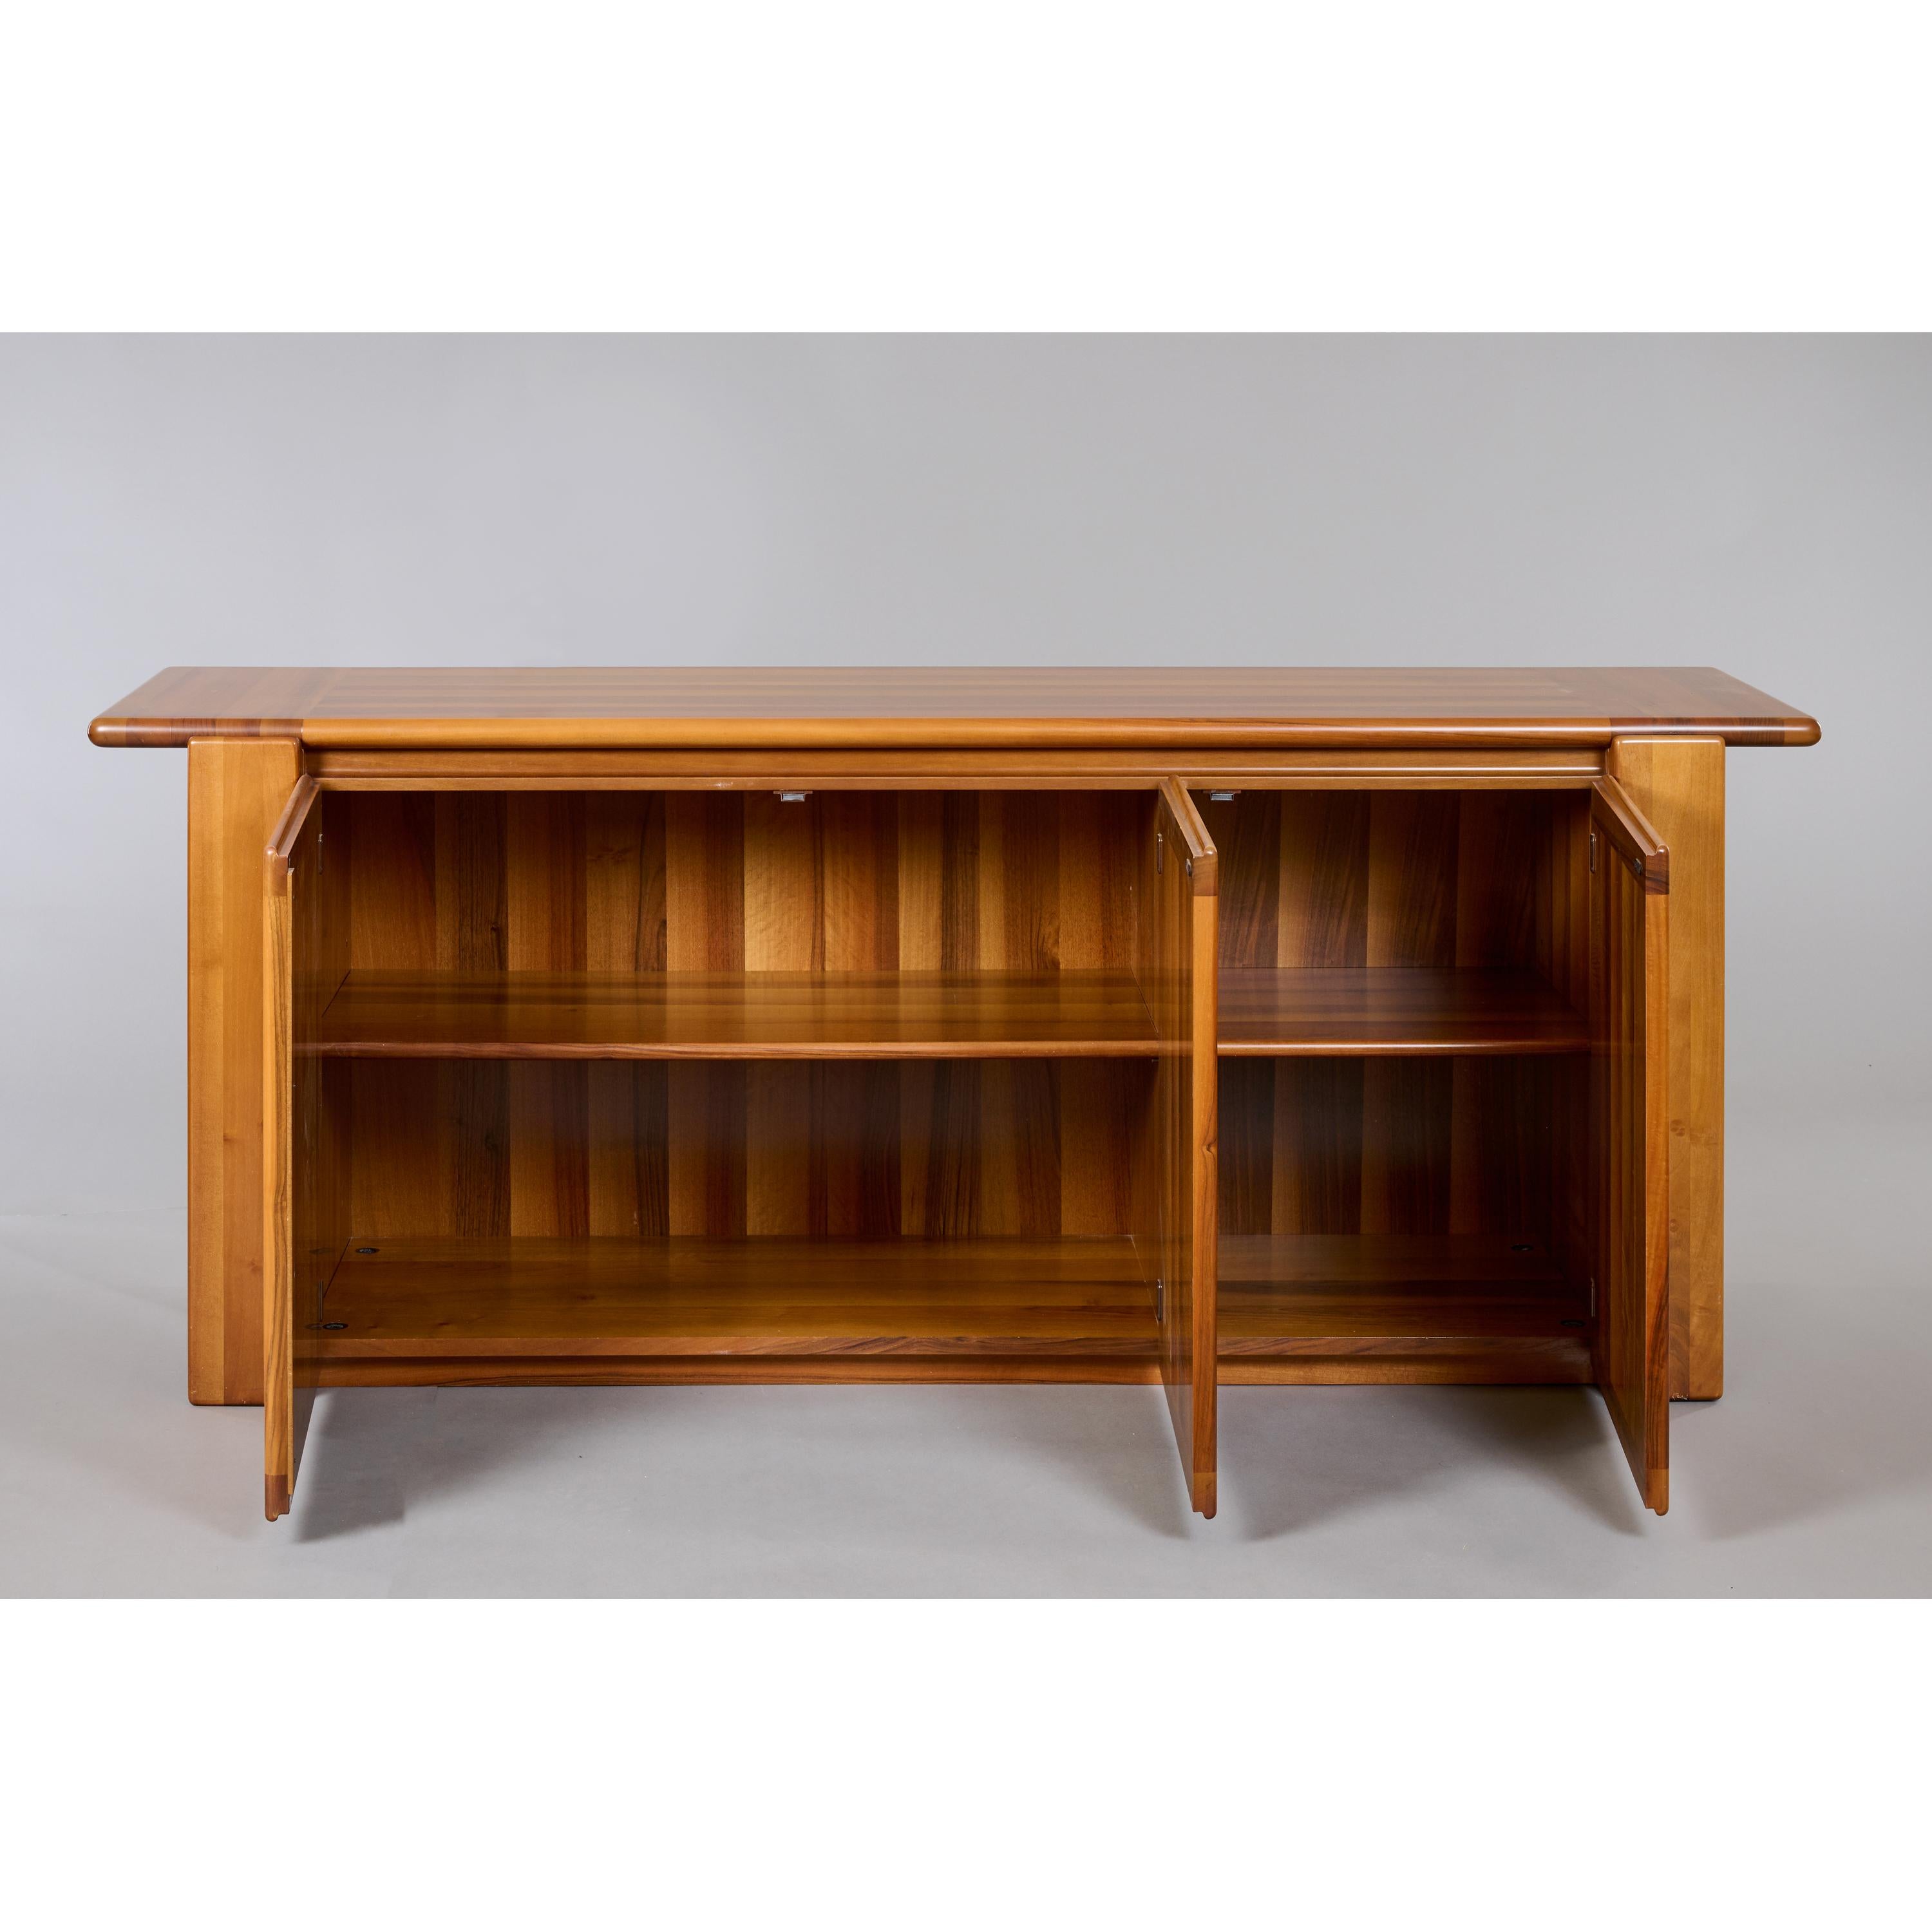 Italian Cabinet in Polished Walnut, Itso Pierre Chapo, Italy 1970s For Sale 4